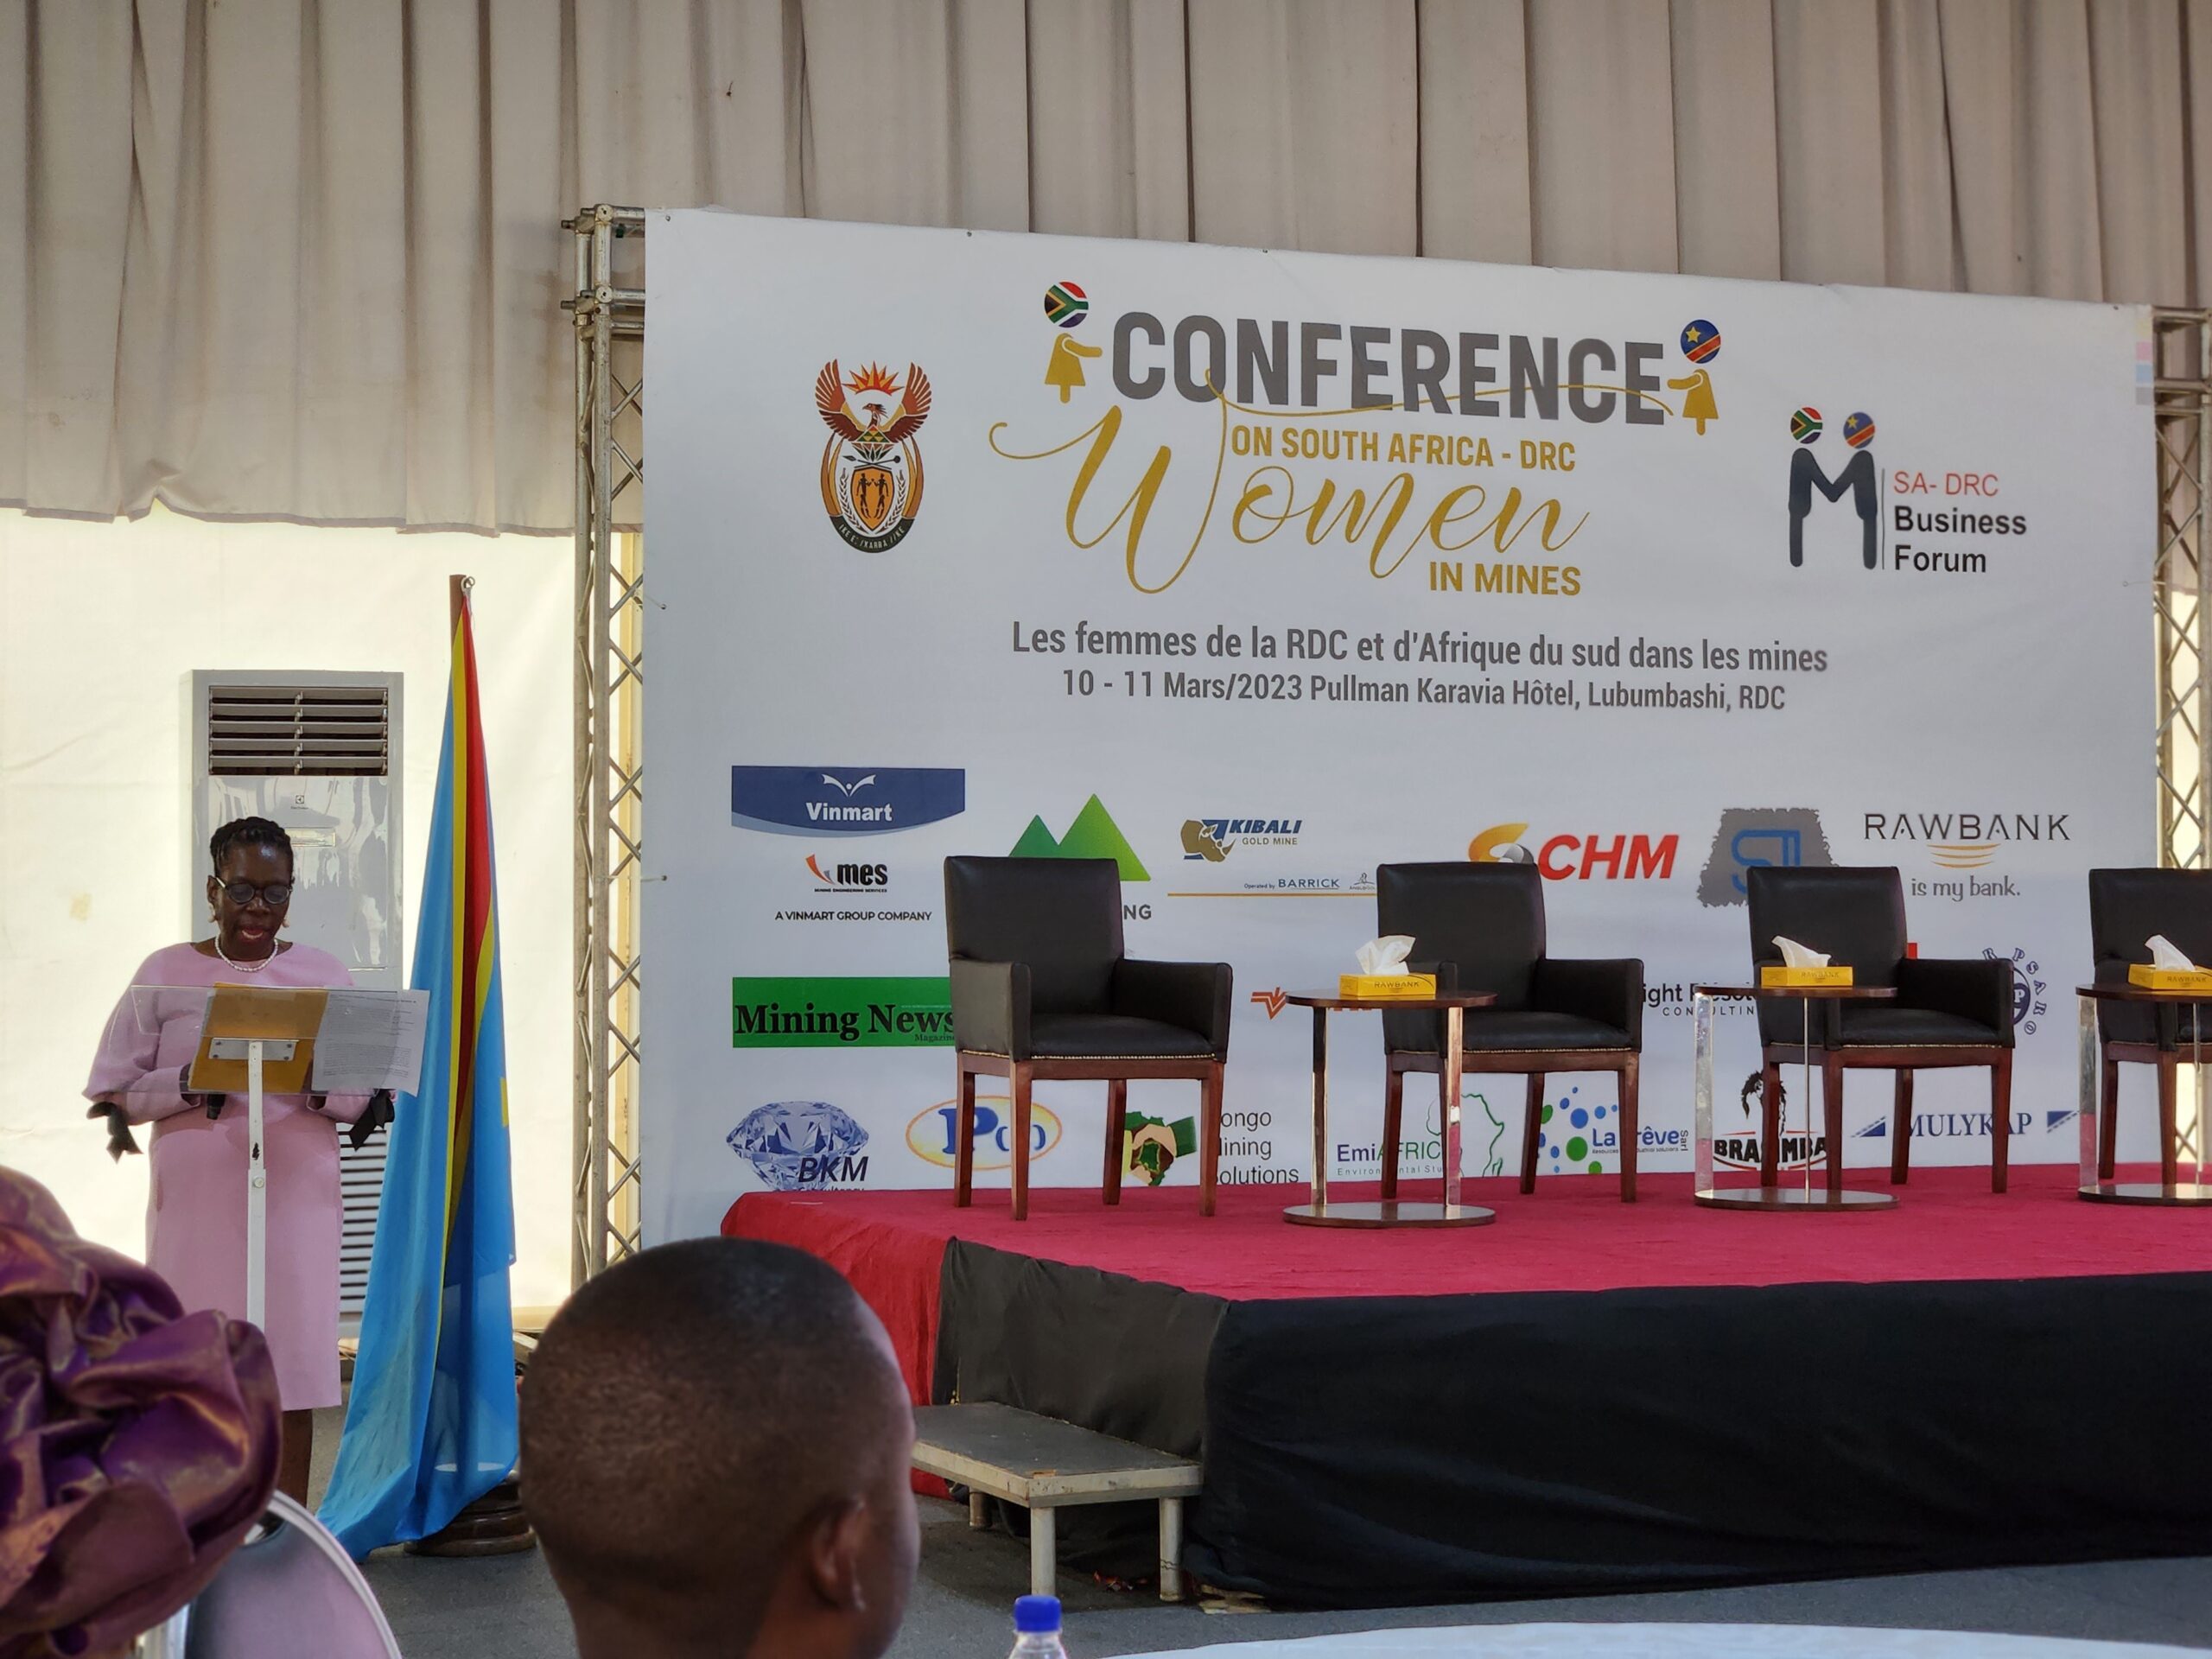 SA-DRC Forum, VinMart Group, Kibali Gold Mine and Women in Mines in Lubumbashi